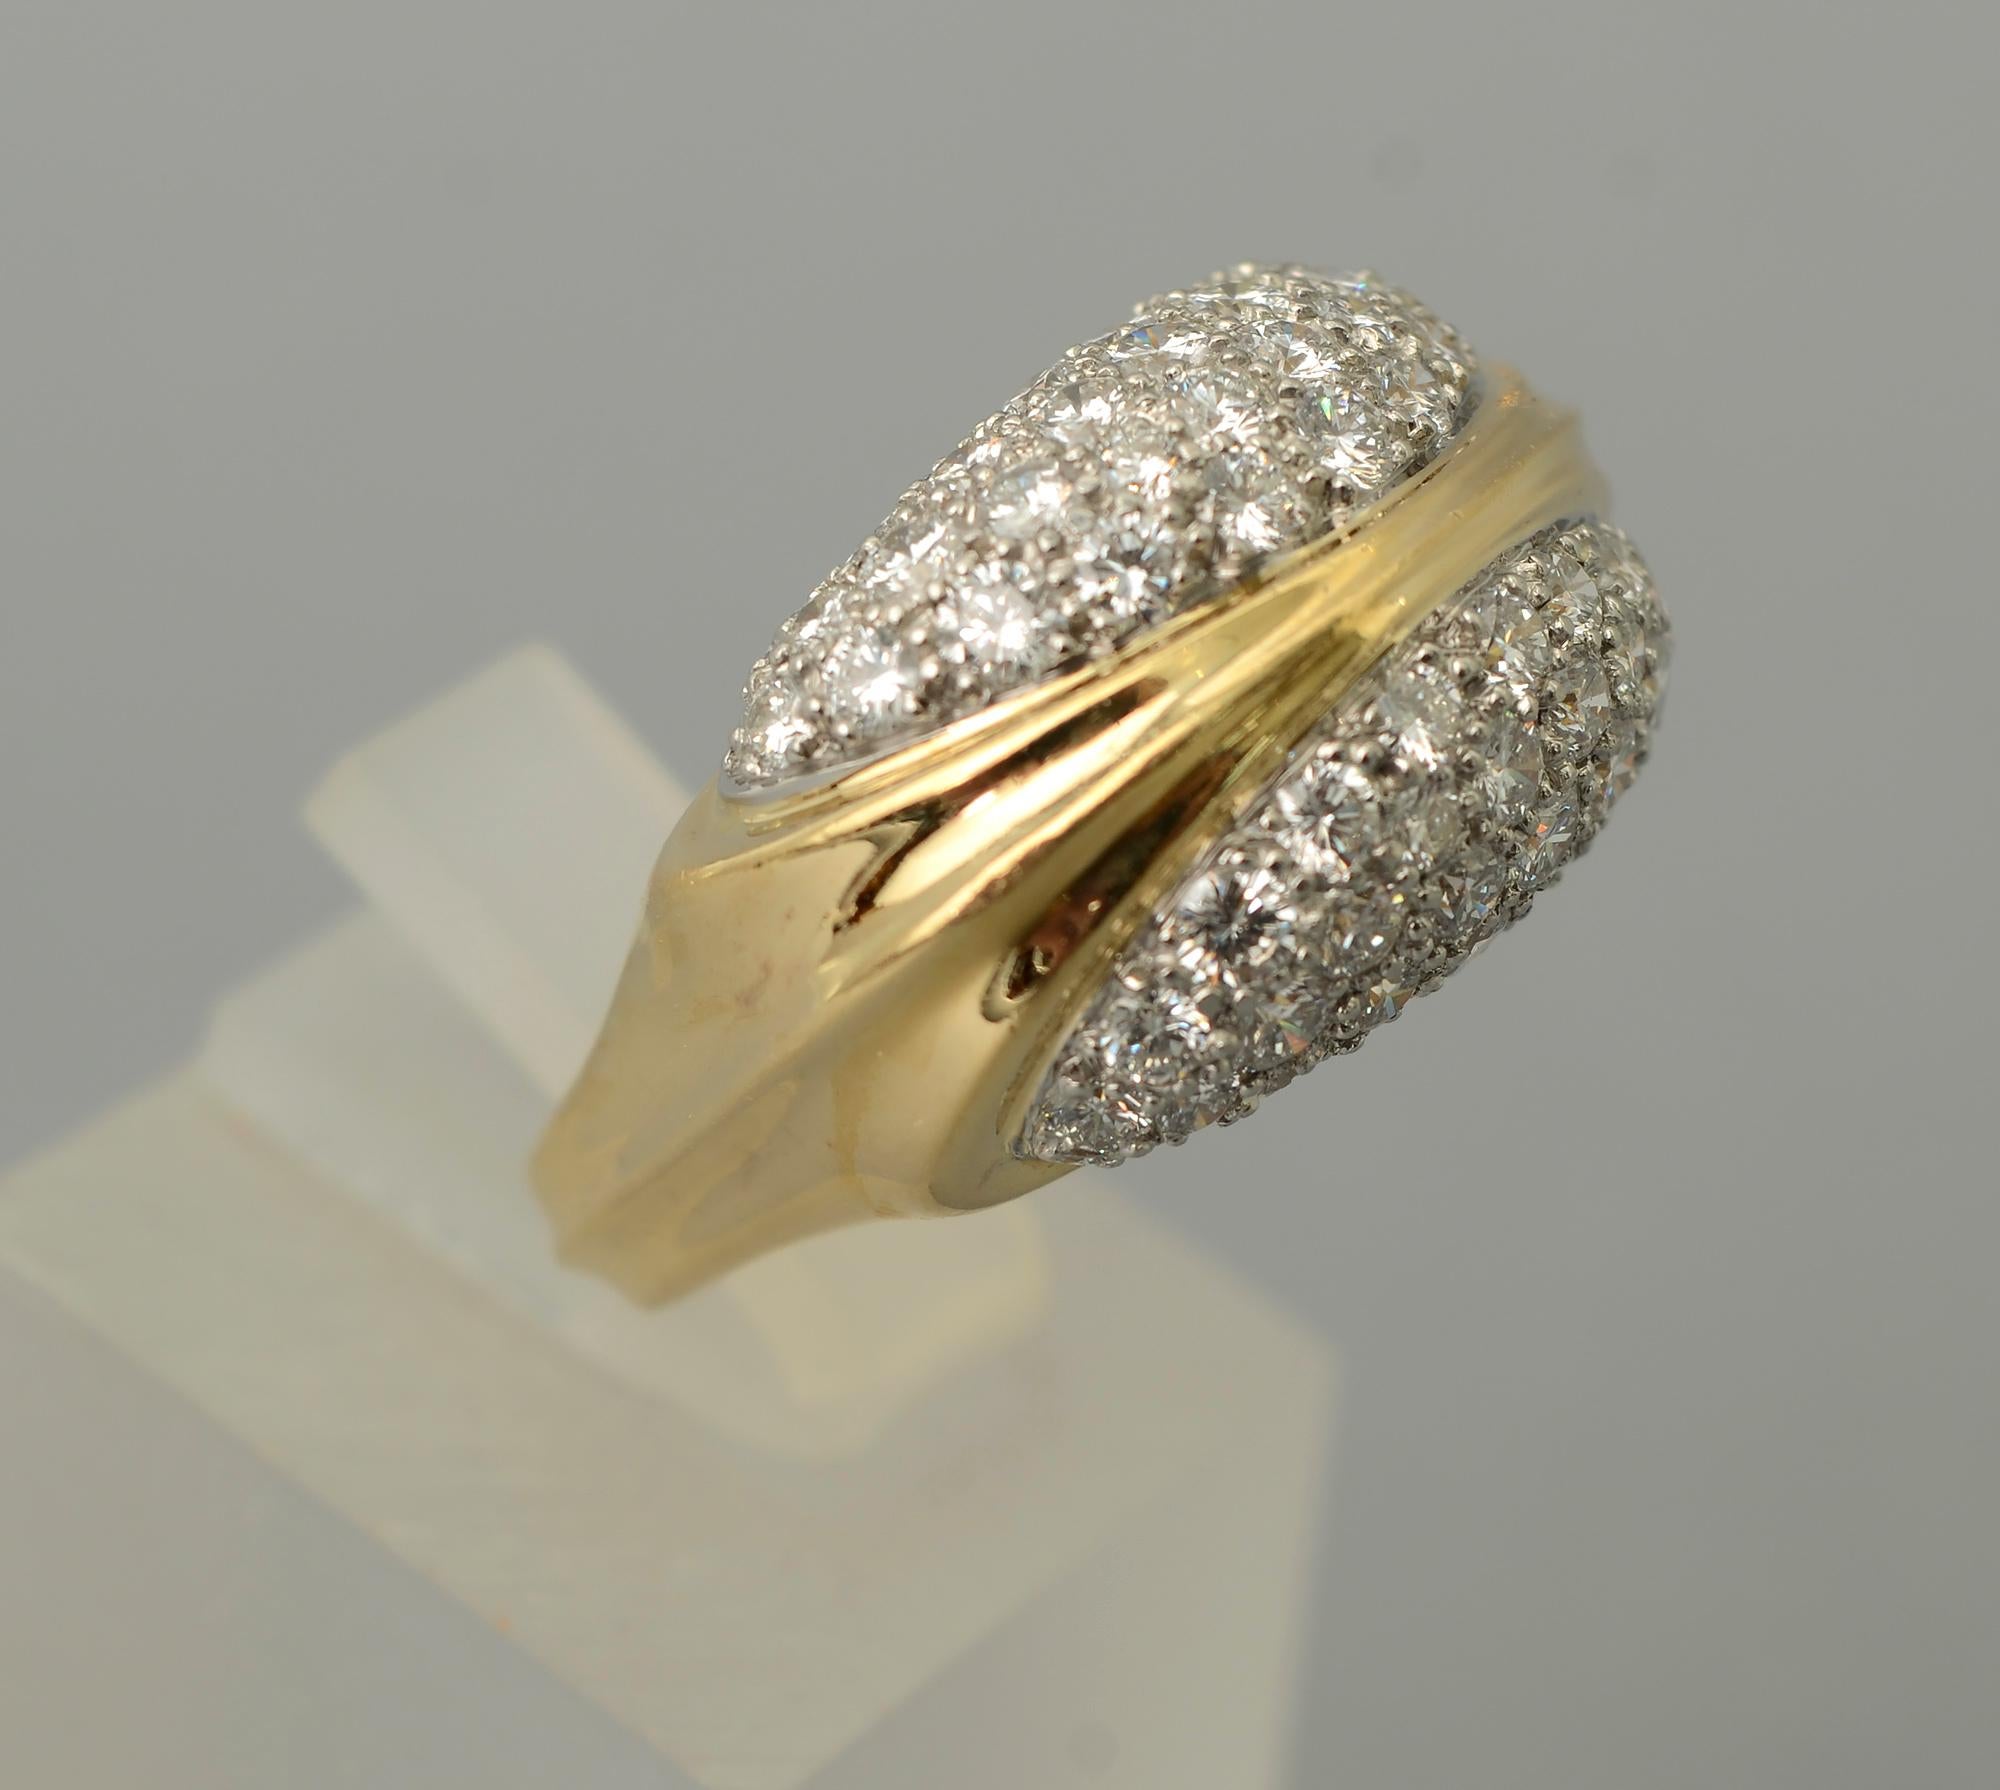 Elegant diamond cocktail ring by Tiffany and Co. The 18 karat ring has approximately 3 carats of VS 1 diamonds; H  color. A gold band that is integrated as part of the design of the entire ring separates two groups of diamonds.
The ring is size 7